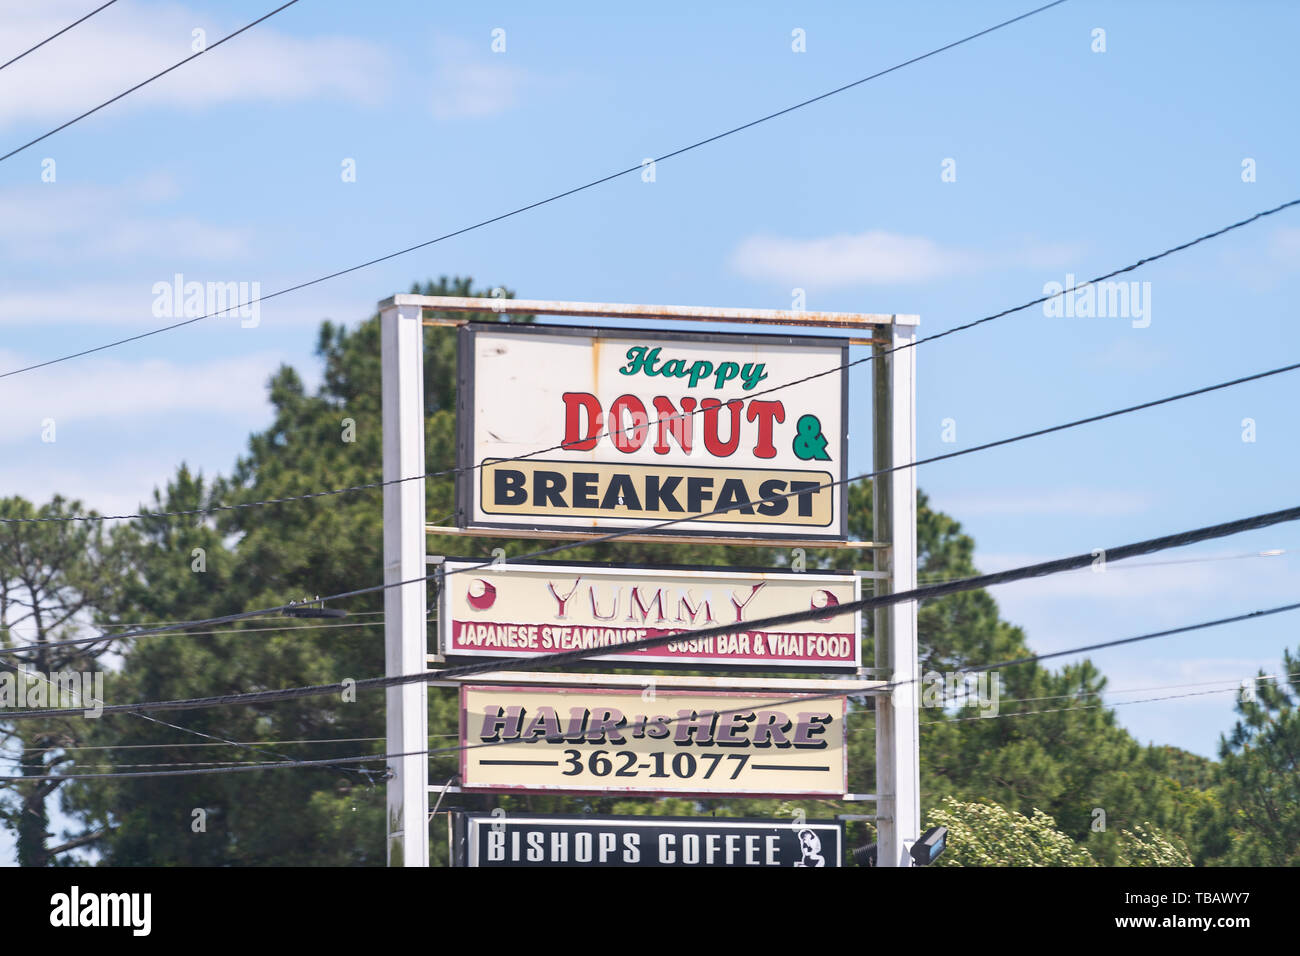 Esther, USA - April 24, 2018: Road sign for restaurants, cafe coffee house food for Happy Donut breakfast, yummy Japanese steakhouse, sushi var and co Stock Photo